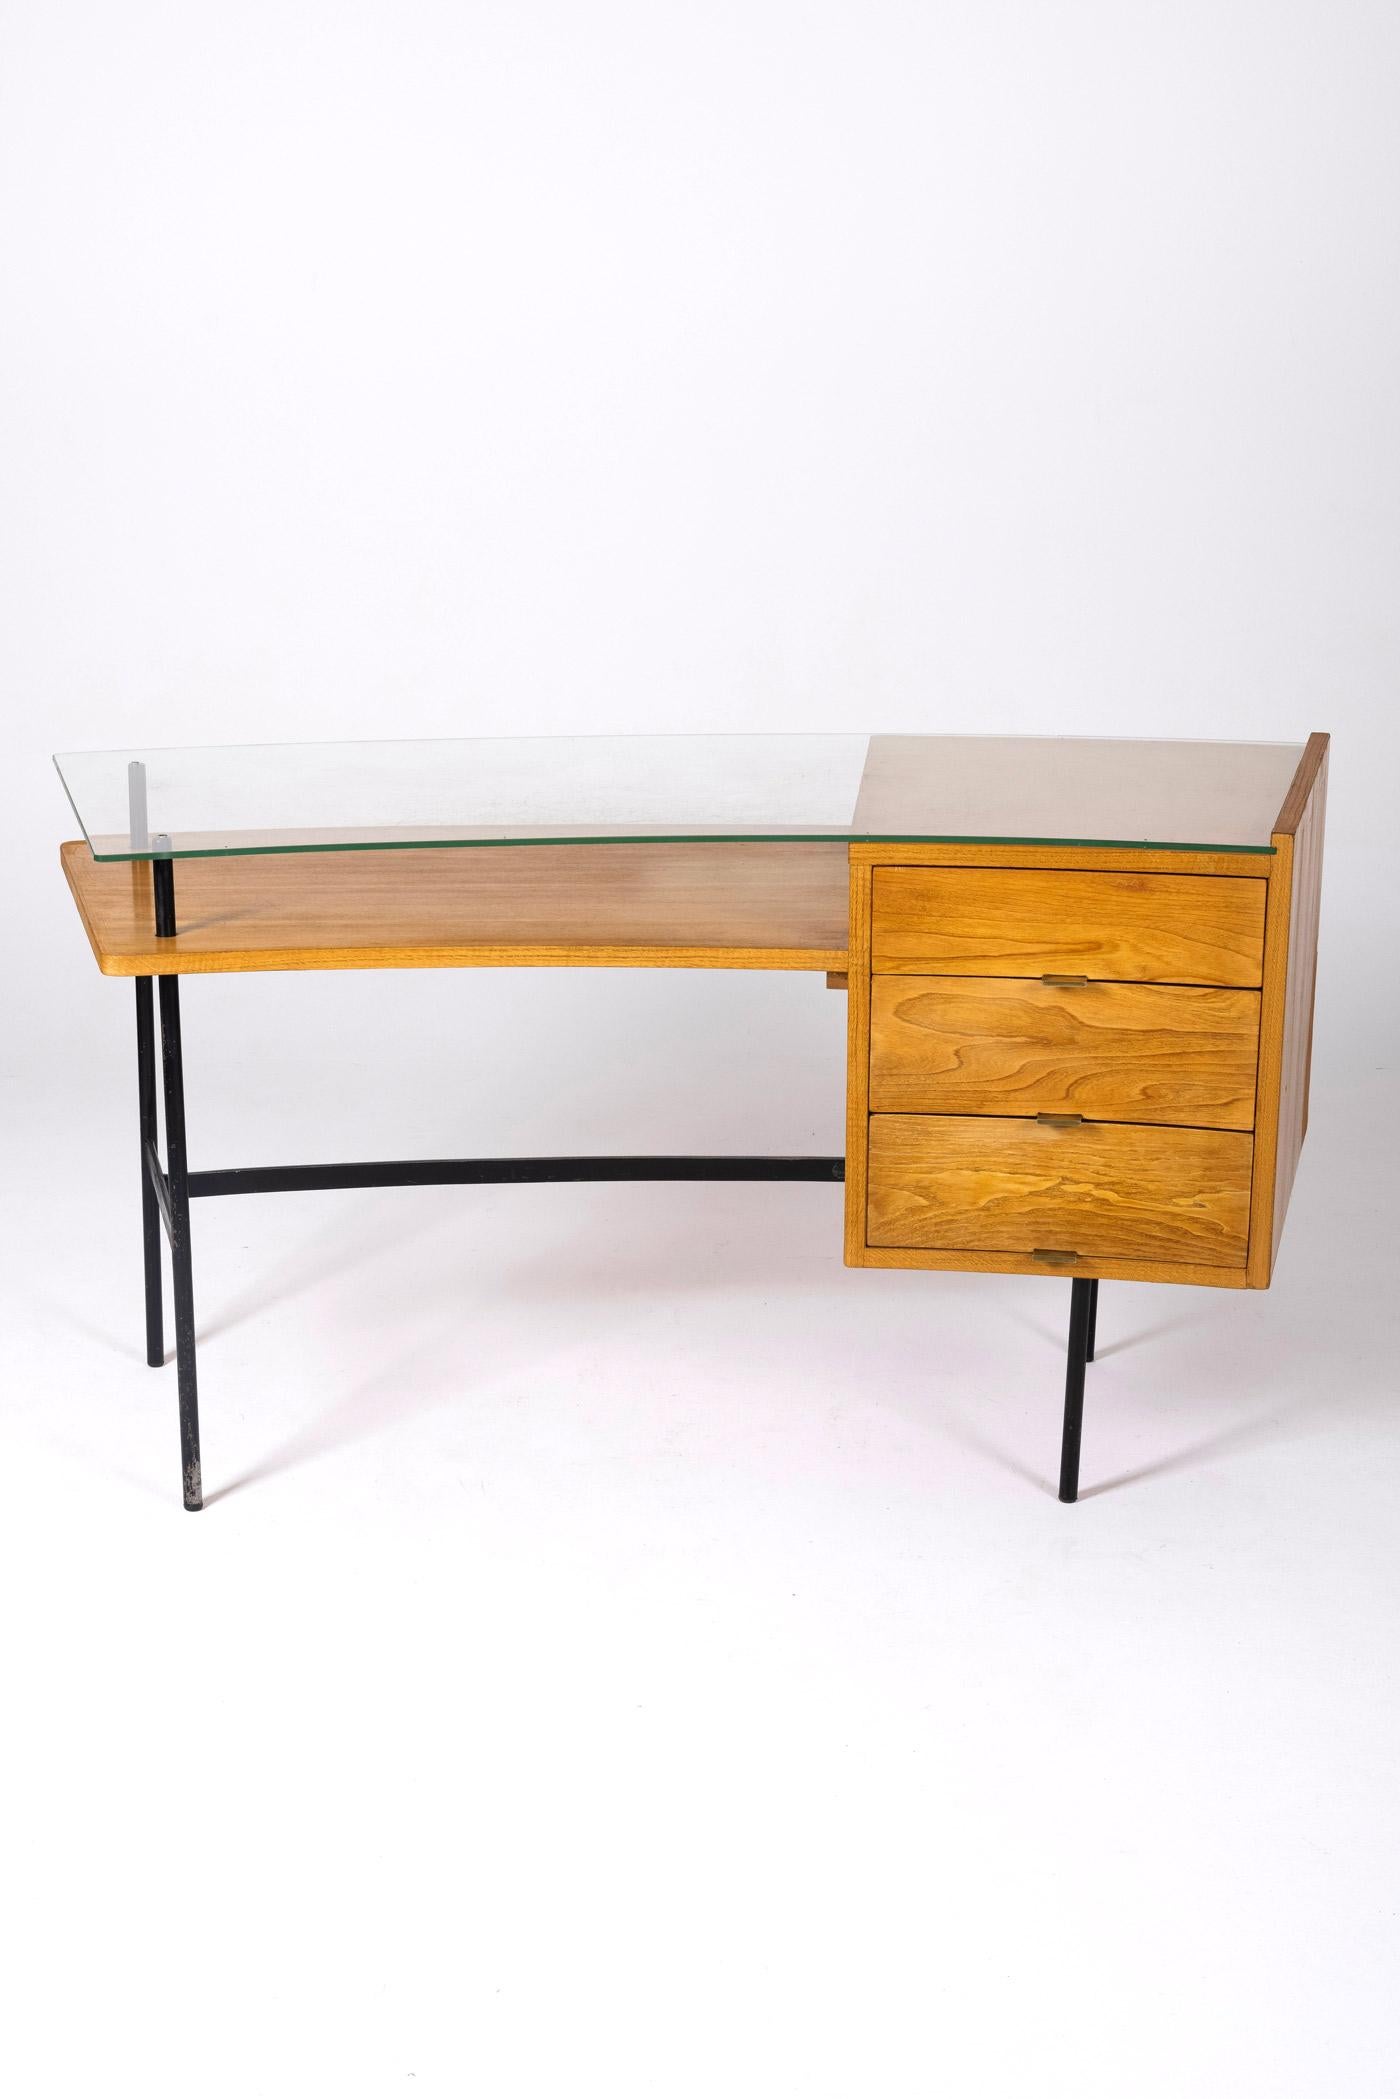 Glass Wood and glass desk by Jean René Picard, 1960s